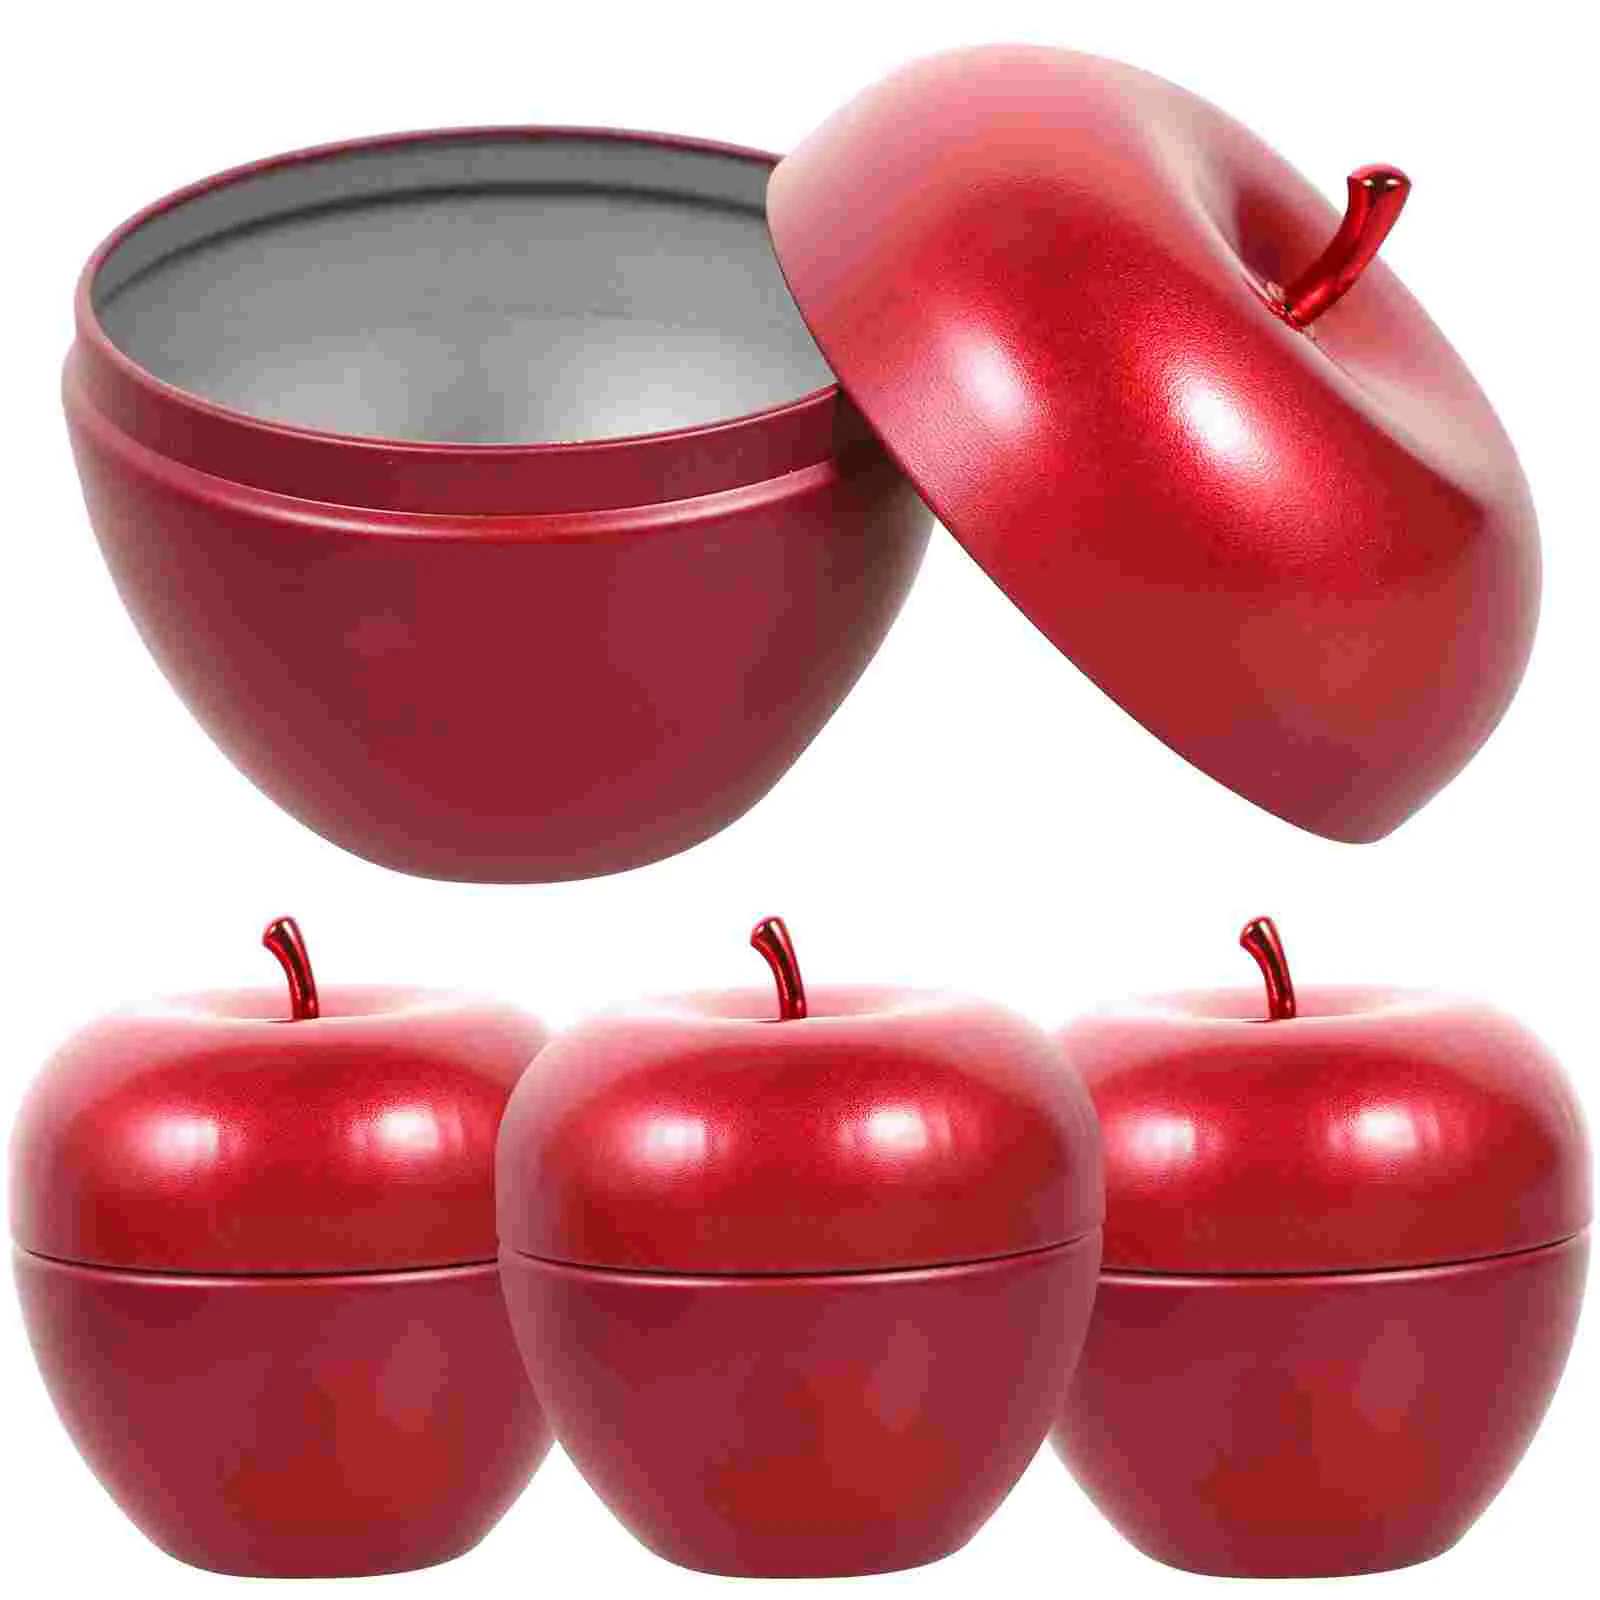 

4 Pcs Apple Jar Coffee Beans Supply Go Food Containers Lids Snack Can Glass Spice Apple-shaped Creative Tea Canister